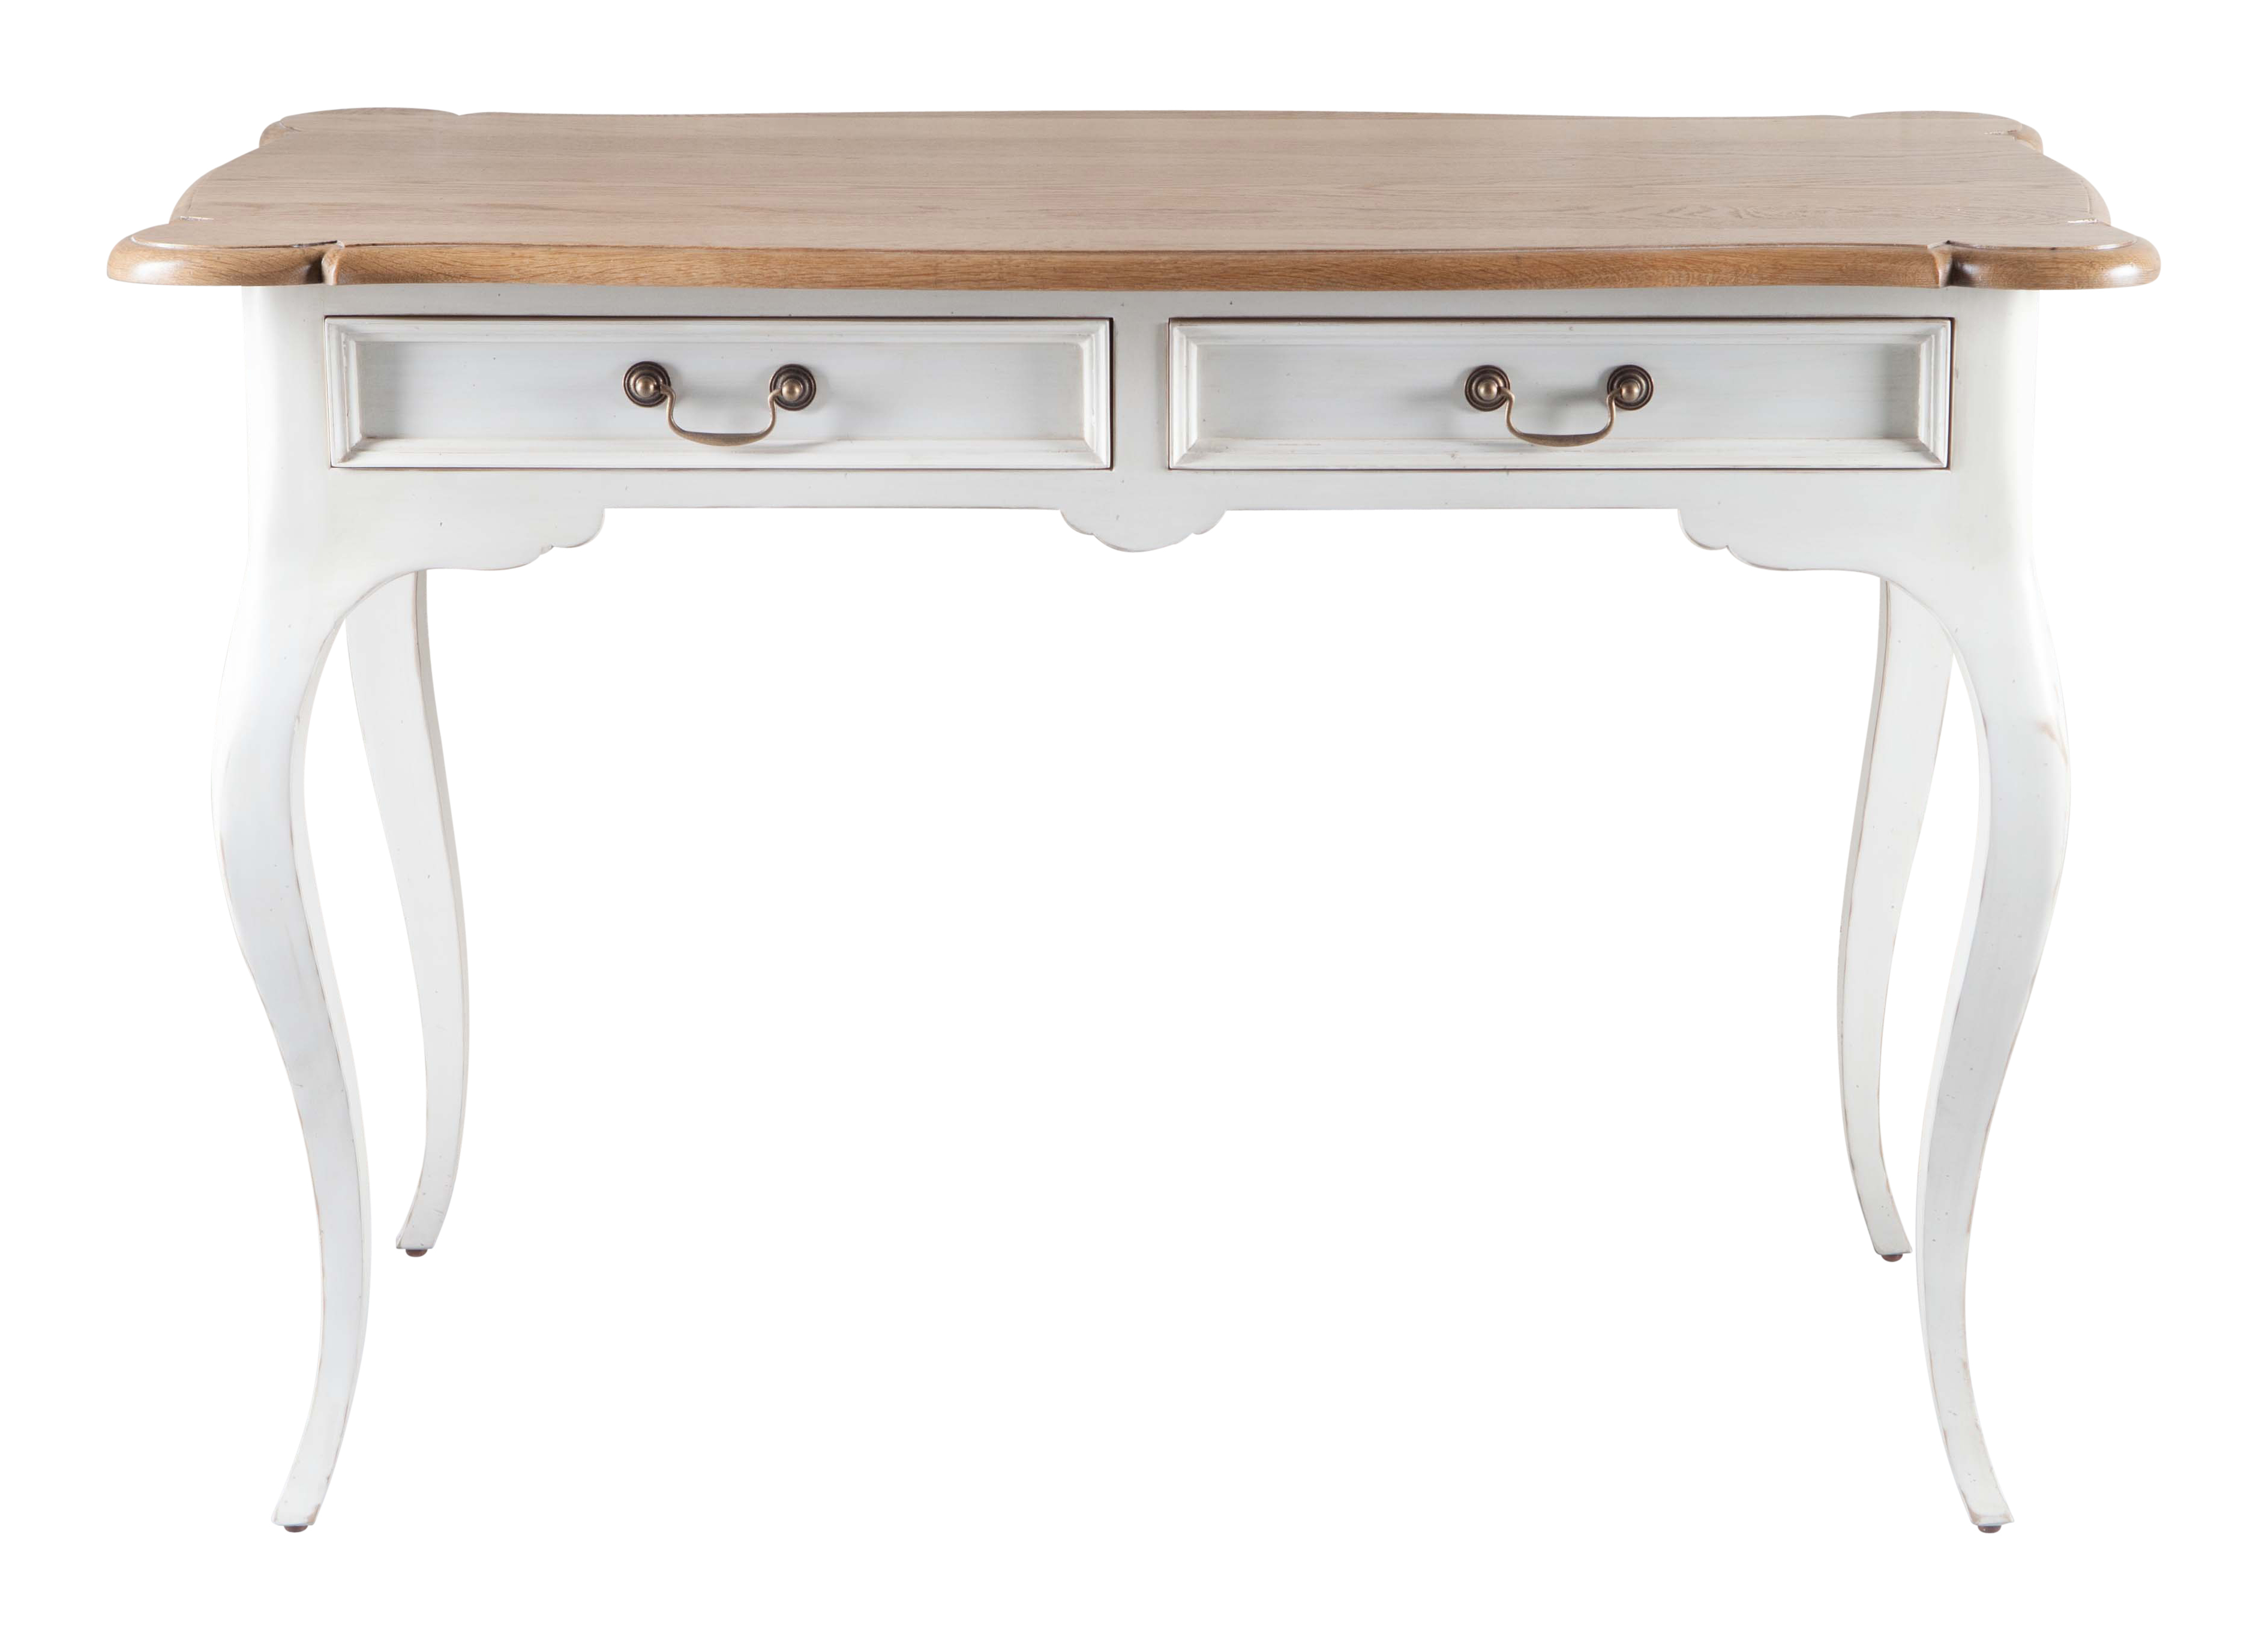 Block & Chisel cabriole leg writing table with scalloped top and white base